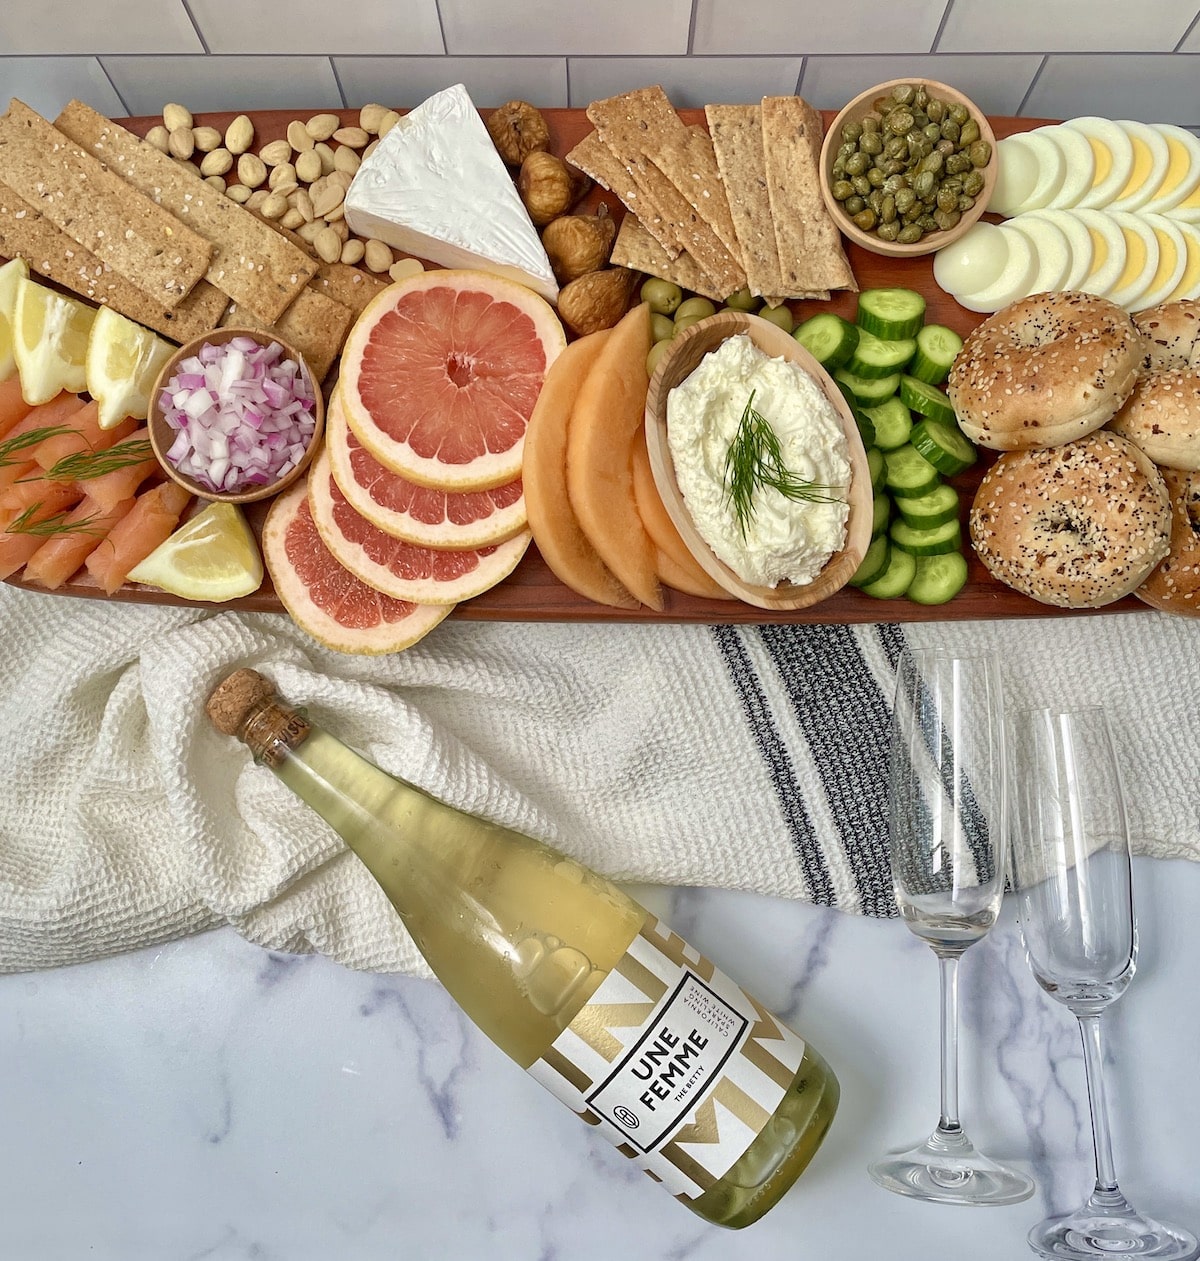 Breakfast board with a bottle of wine and glasses.